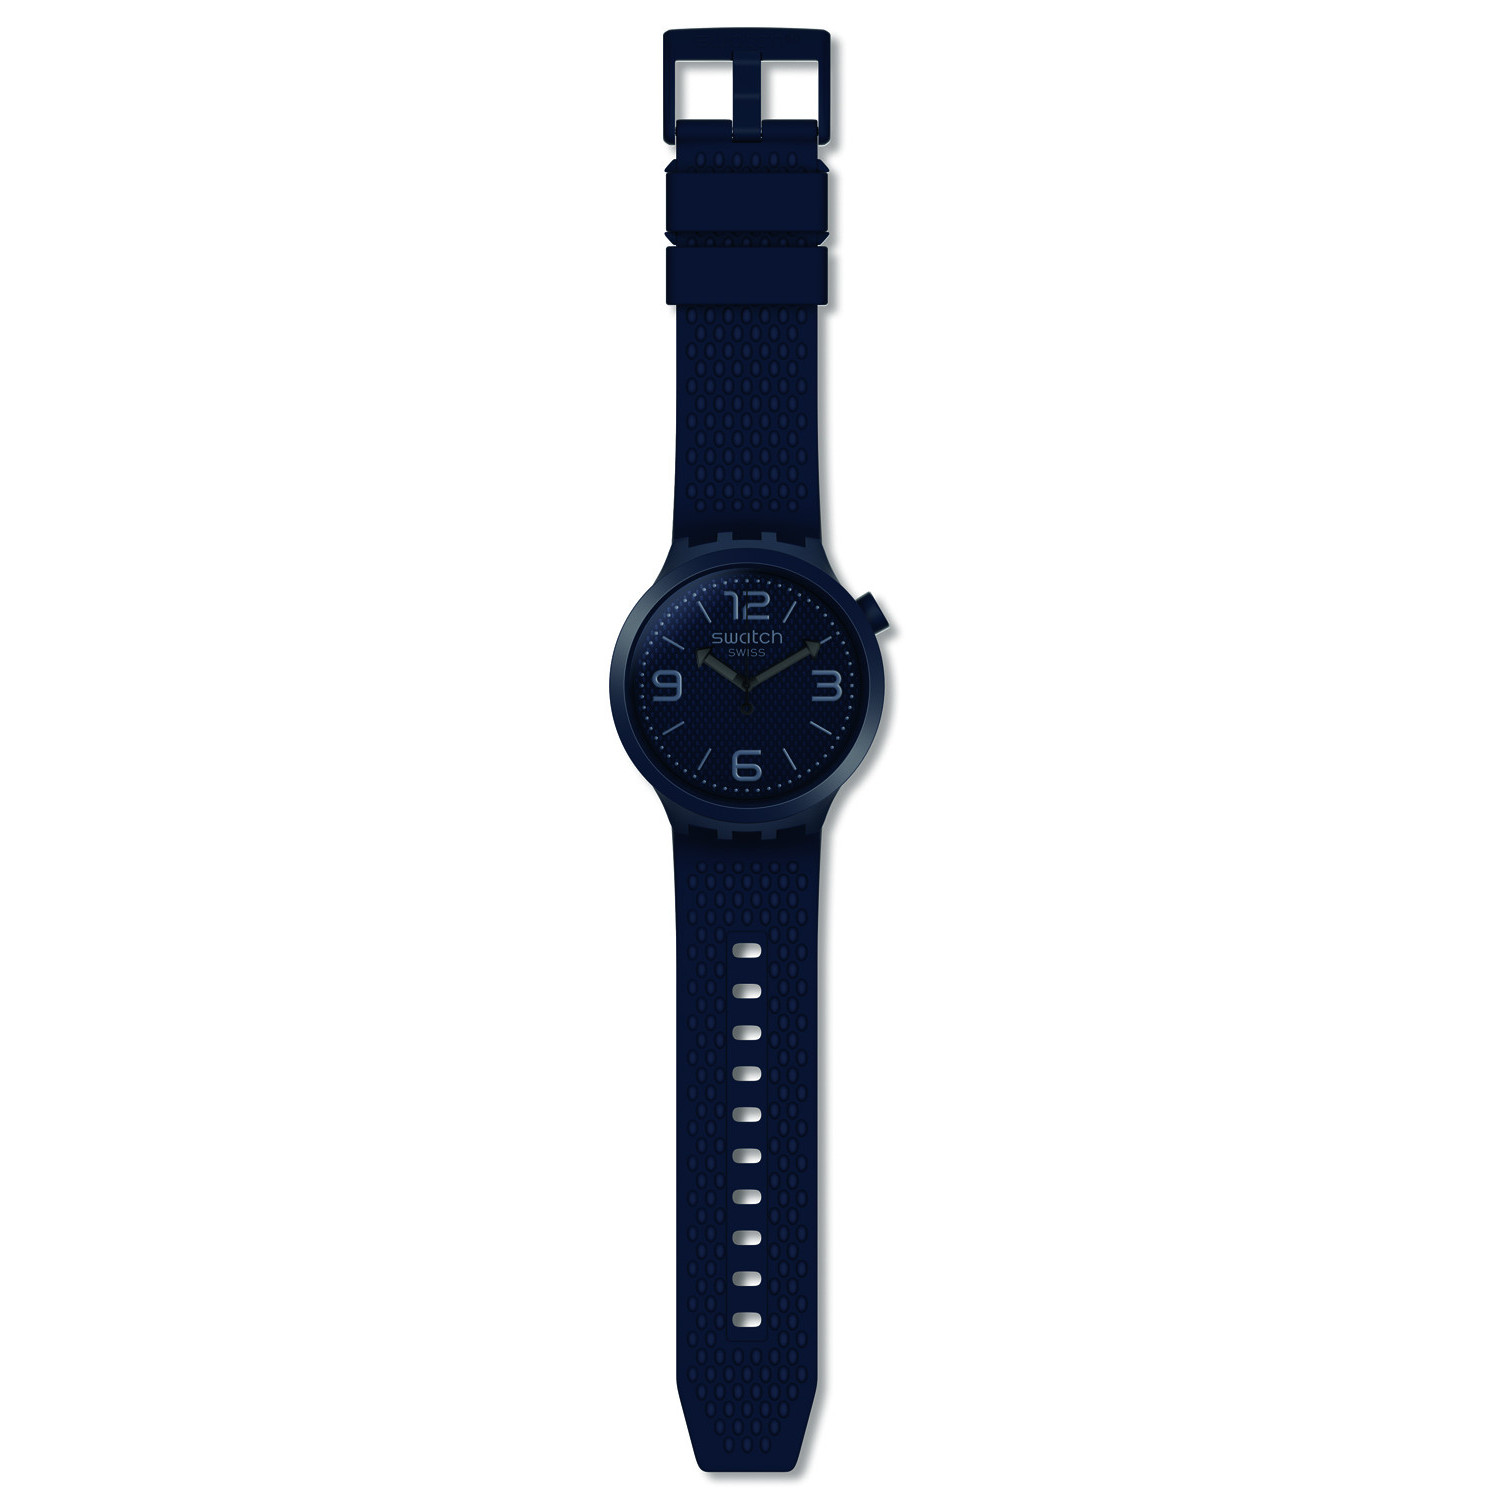 Montre Swatch Bbnavy silicone bleu
collection Swatch Big Bold